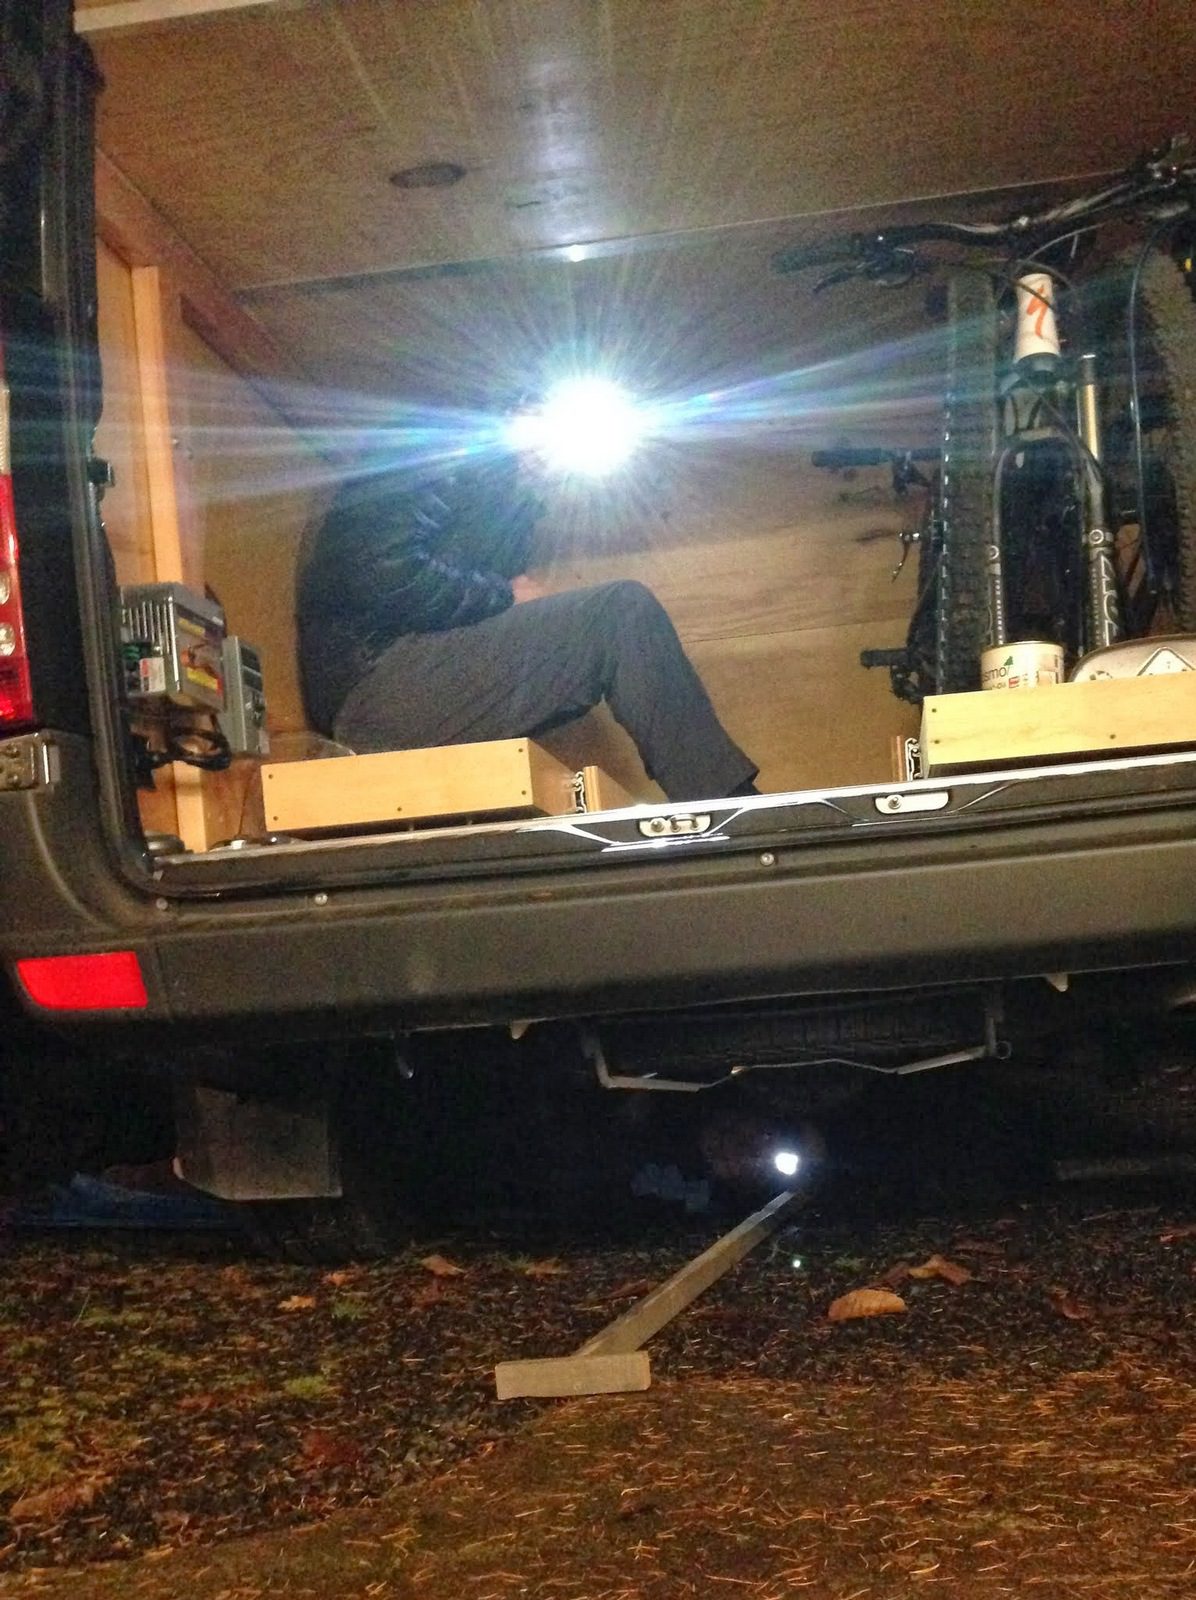 Sub-optimal working conditions... At least my father-in-law is under the van while I'm cramped in the bike garage.